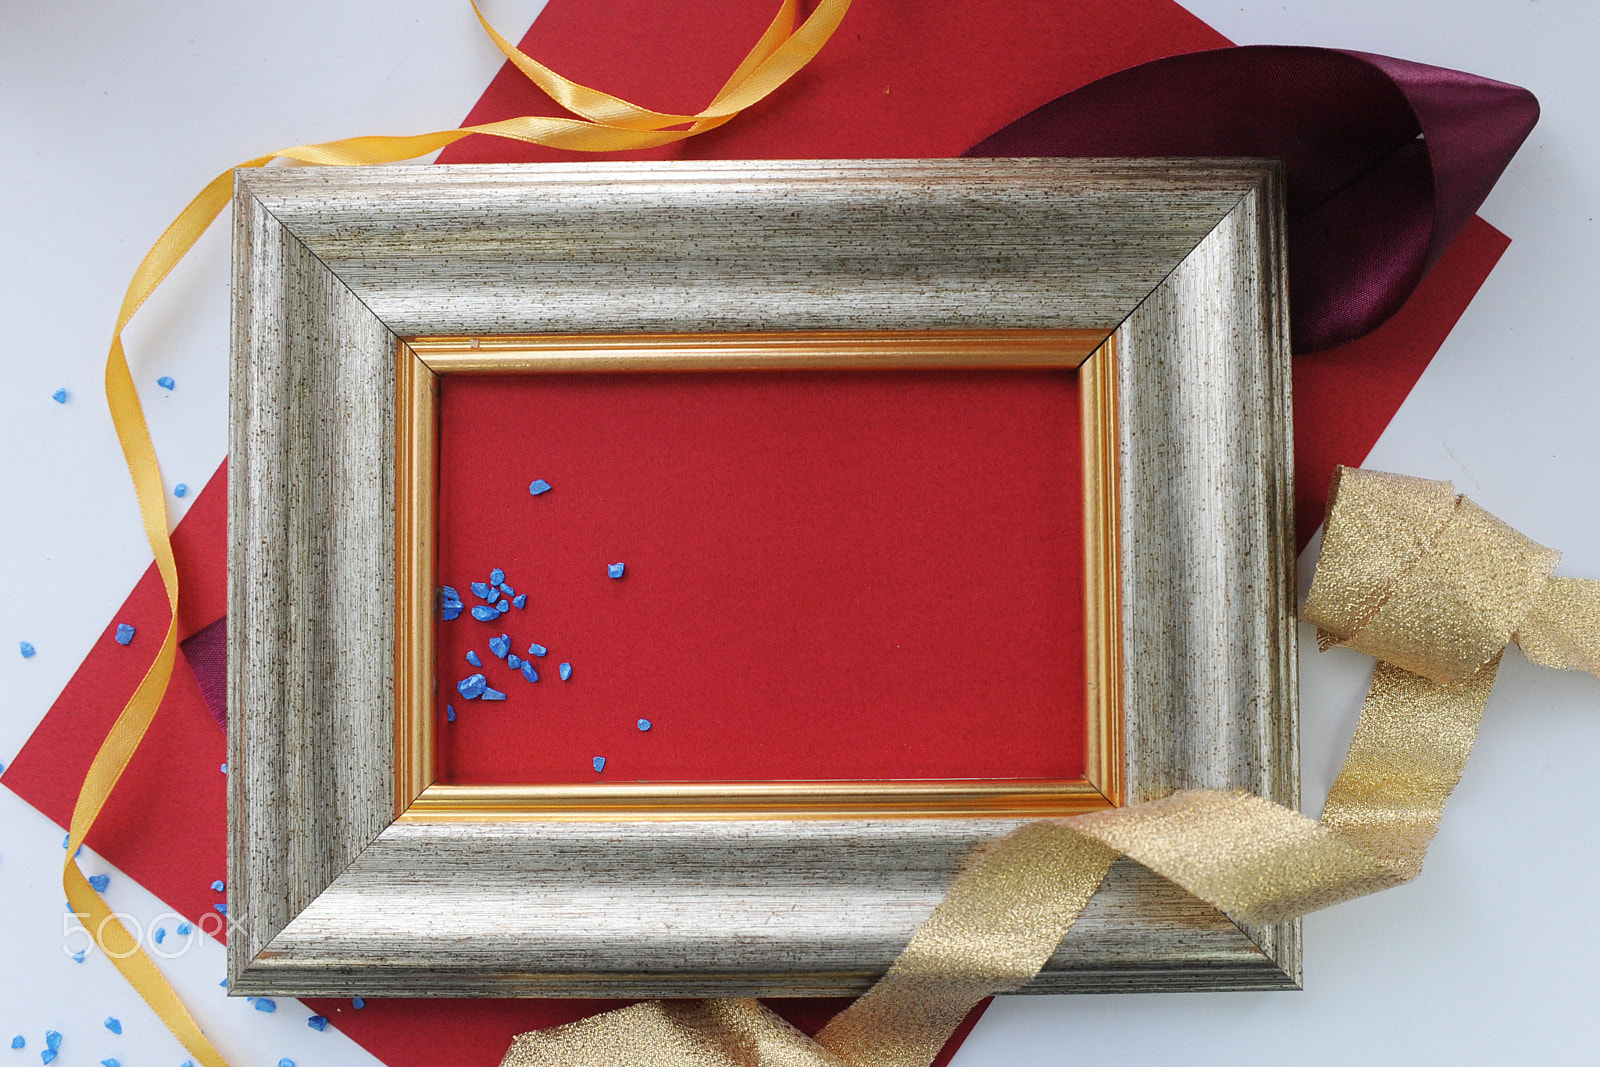 Nikon D700 sample photo. Decorated frame with red paper photography